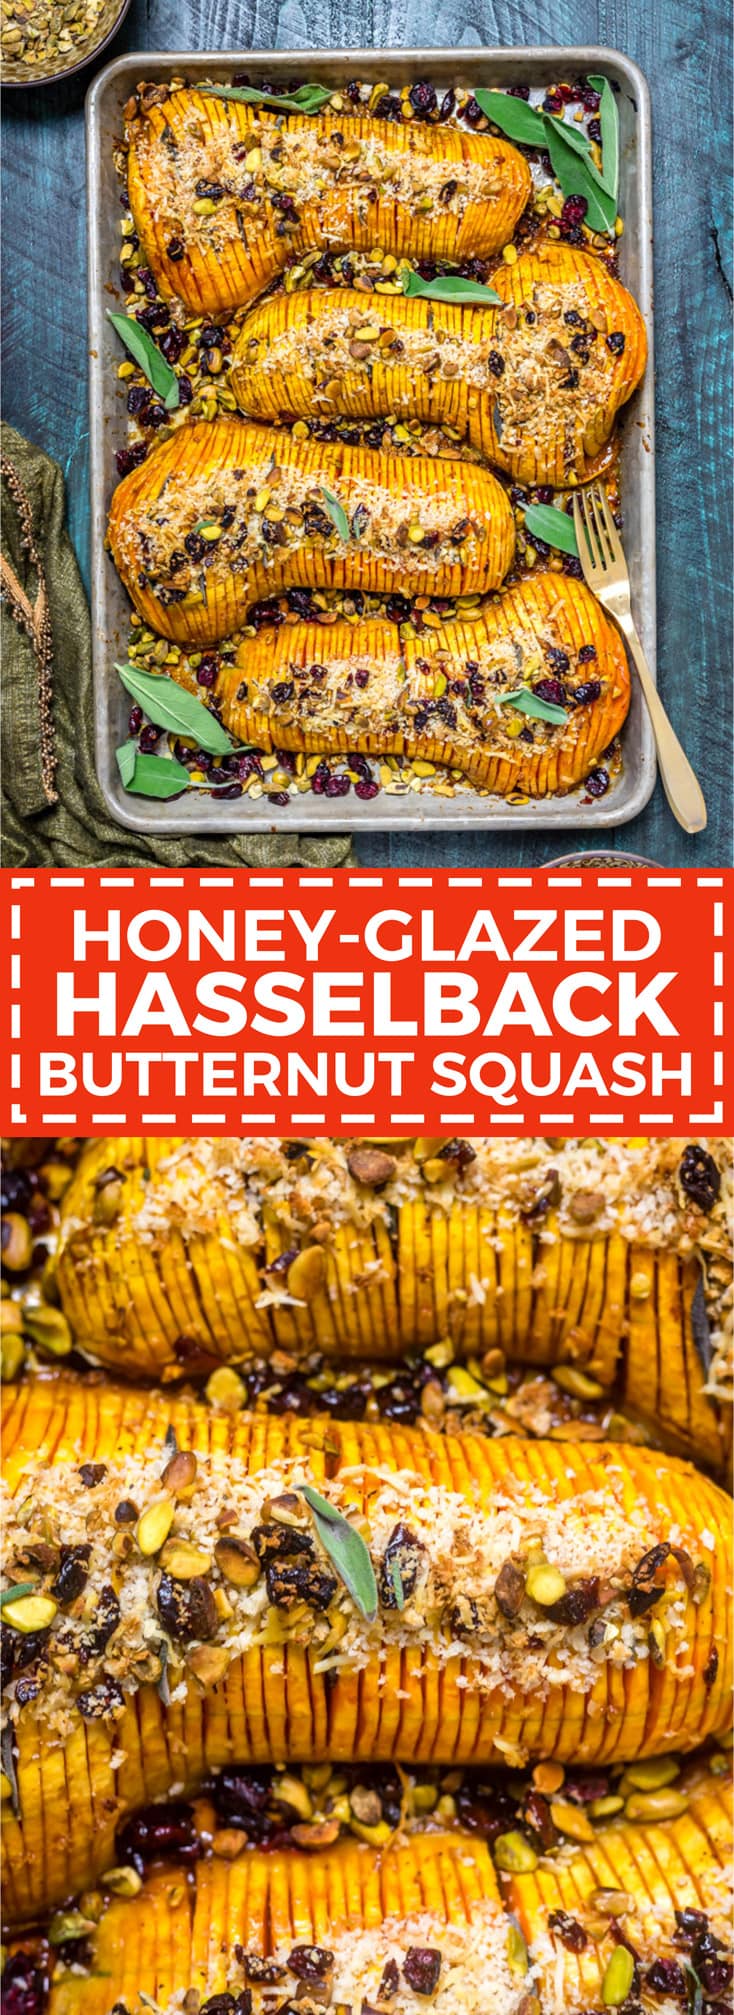 Honey-Glazed Hasselback Butternut Squash With Parmesan Breadcrumbs. This fall and winter dish has it all: thin crisp slices, tender flesh, a sweet and garlicky glaze, and crunchy pistachio and parmesan breadcrumb topping. | hostthetoast.com